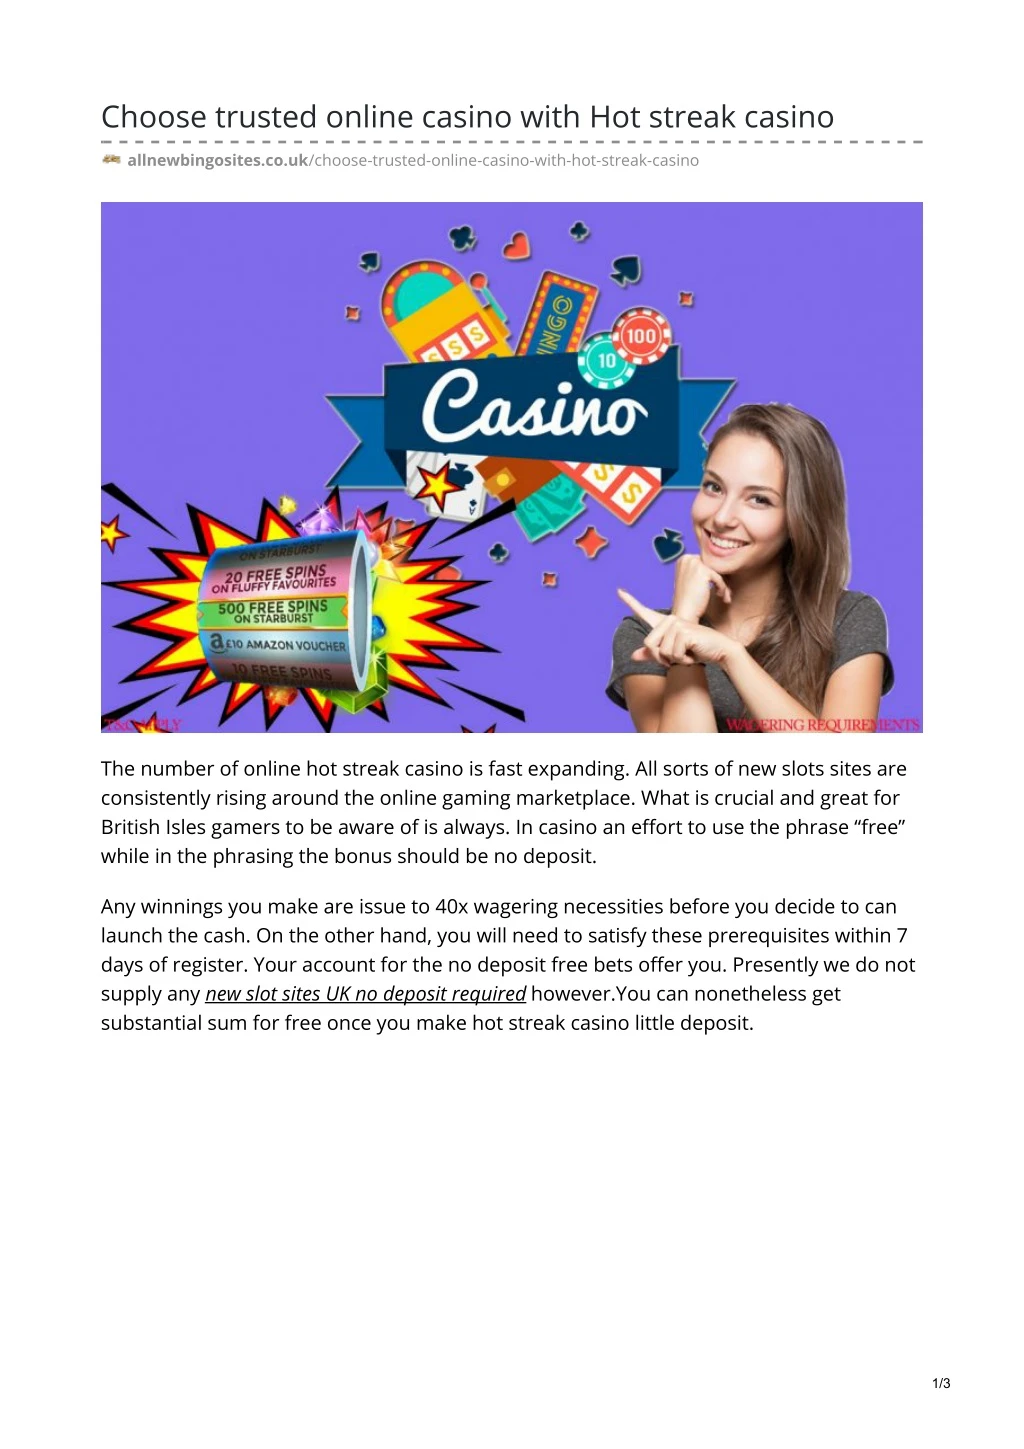 choose trusted online casino with hot streak